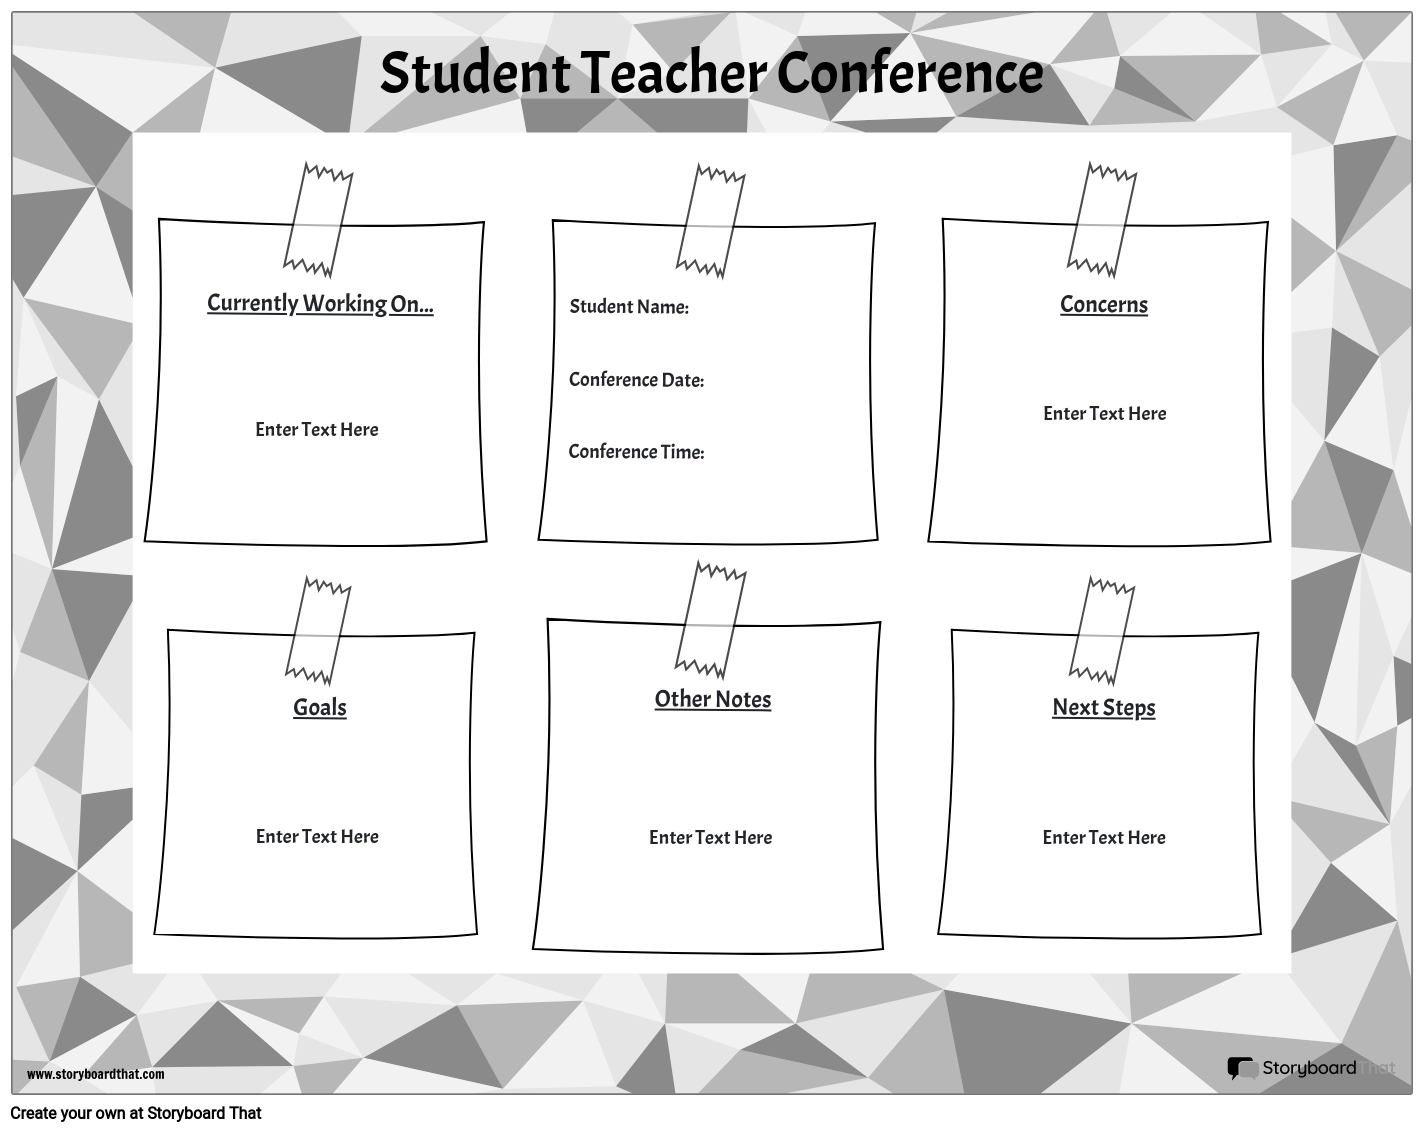 Student/ Teacher Conference Template with Patterned Background